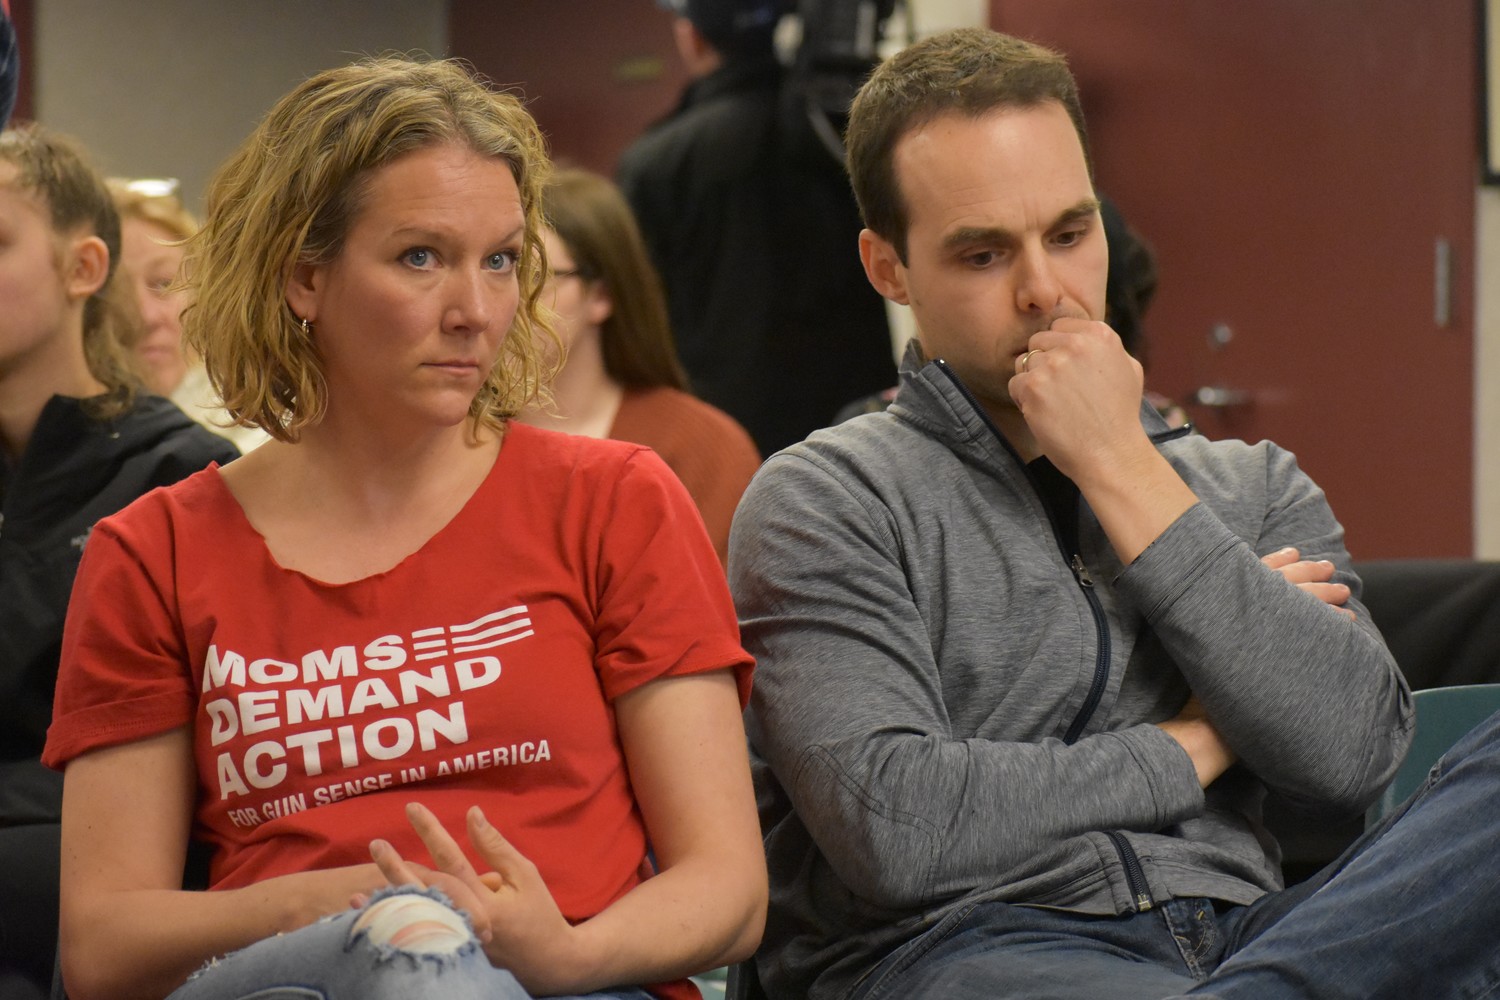 Tracy Bacher, a leader of Moms Demand Action in Nassau County, and Robert Gaafar, a Rockville Centre resident who escaped the mass shooting in Las Vegas last October, spoke at a forum about gun violence at the Rockville Centre Public Library on Saturday.